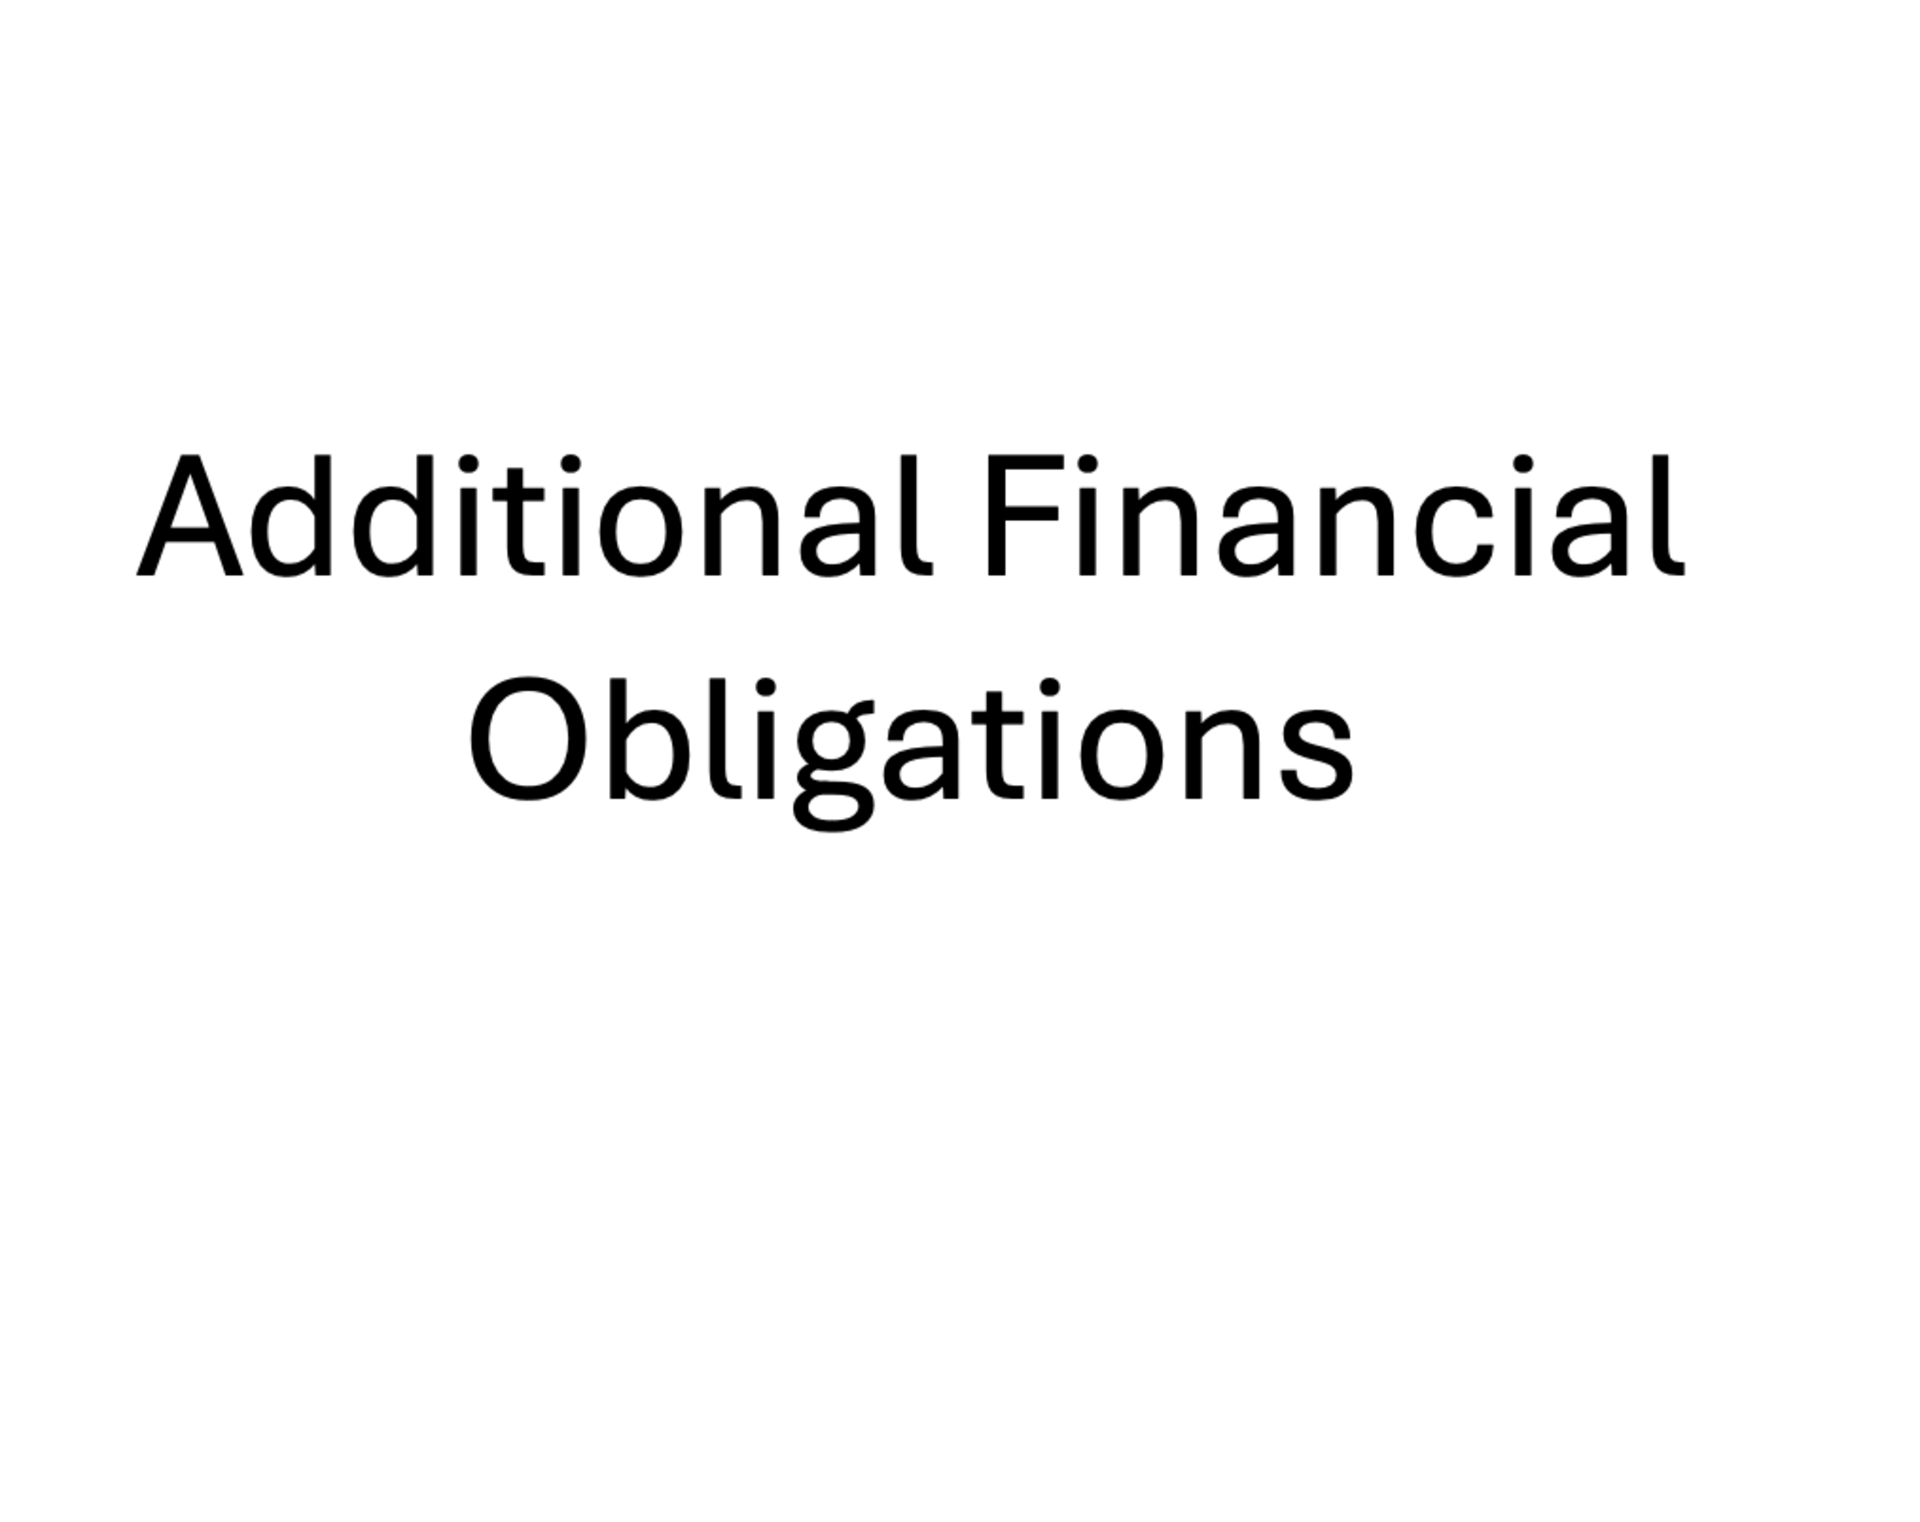 INFORMATIONAL ONLY: Additional Financial Obligations - Please Read Description